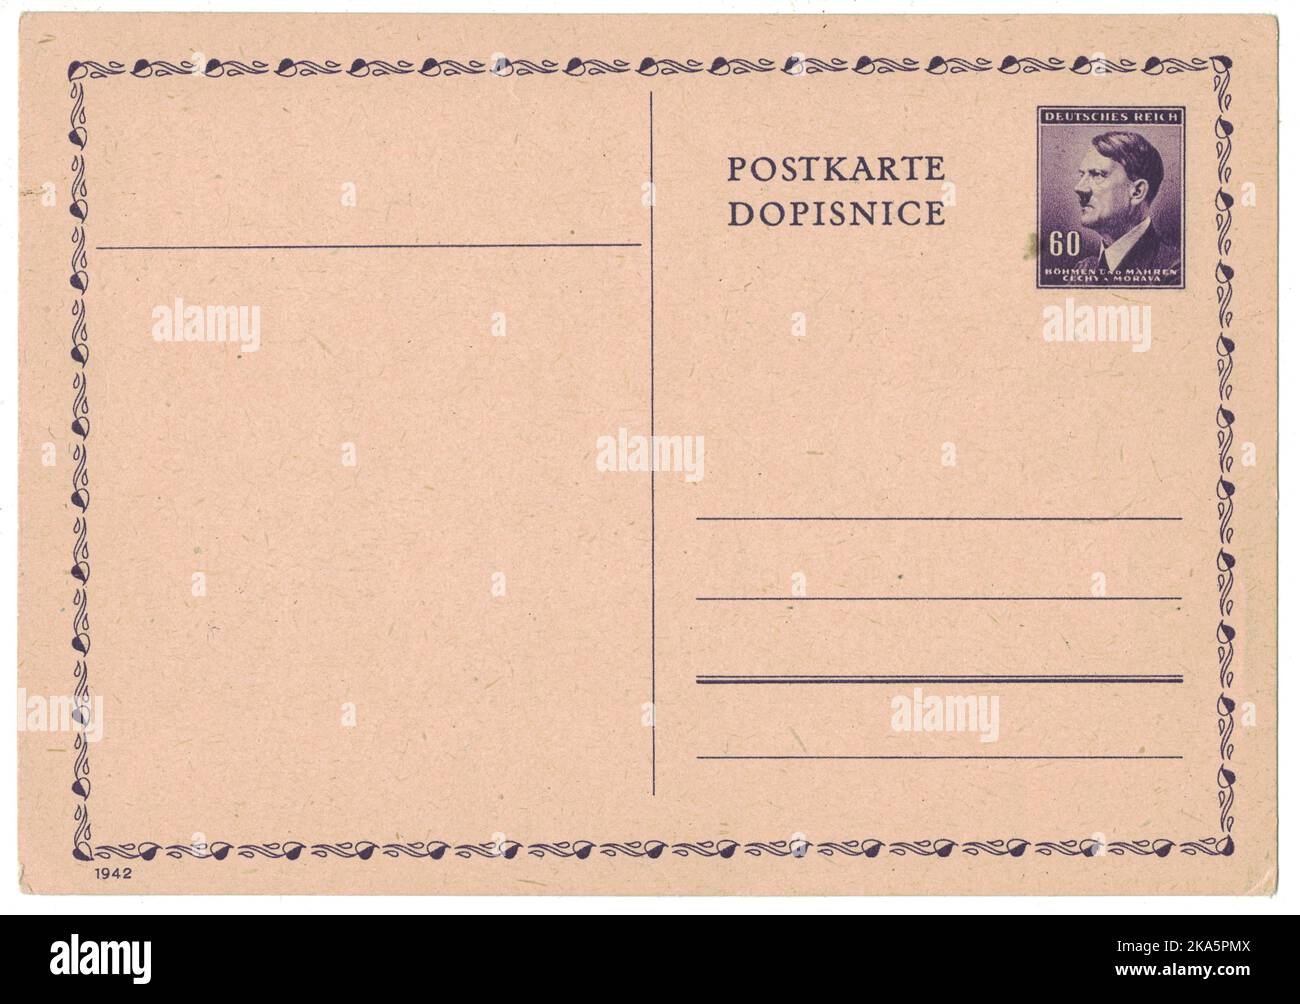 GERMANY (PROTECTORATE OF BOHEMIA AND MORAVIA)  - CIRCA 1942: Old postal card with printed post stamp shows portrait of Adolf Hitler (politician, leader of Nazi Party, dictator, veteran of World War),  violet, circa 1942 Stock Photo